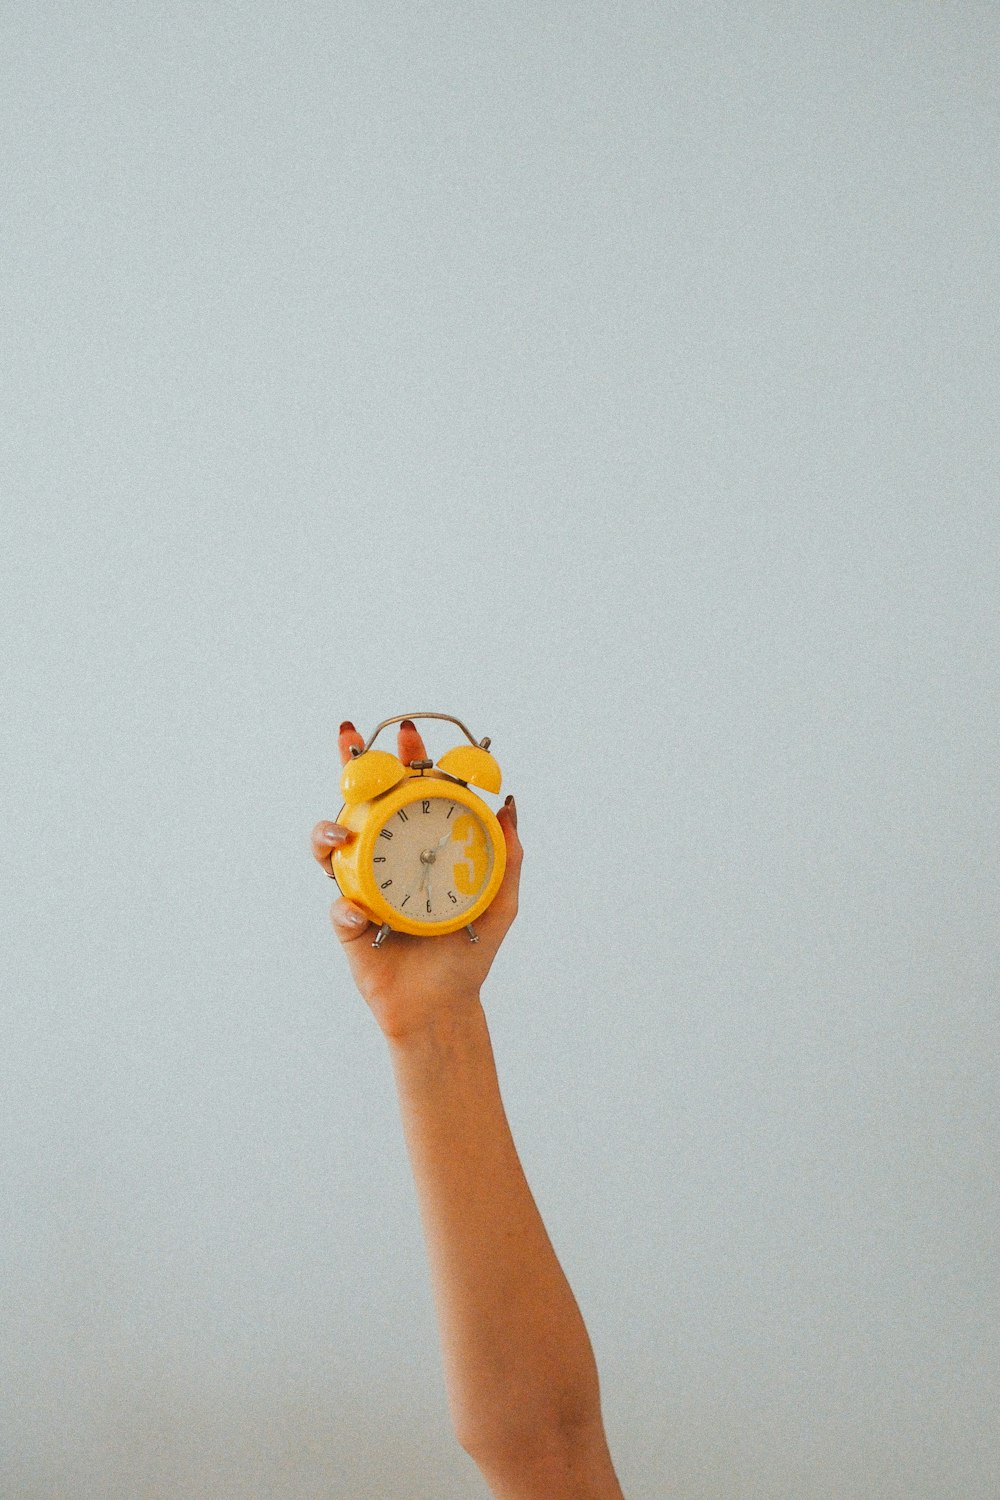 person holding yellow and white analog watch